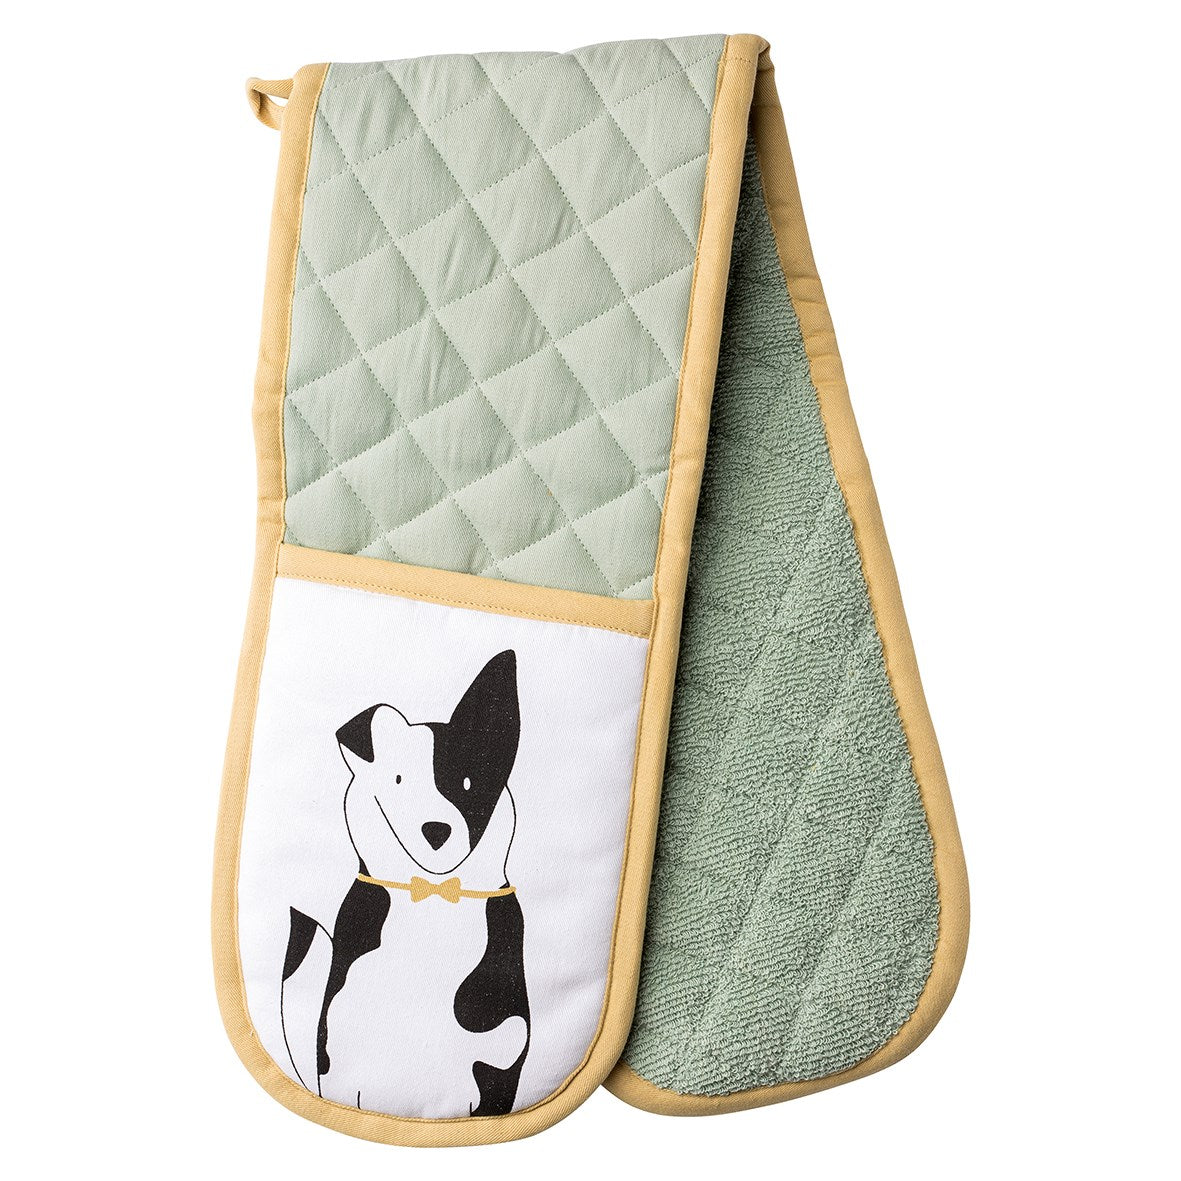 The English Tableware Company Playful Pets Dog Double Oven Glove